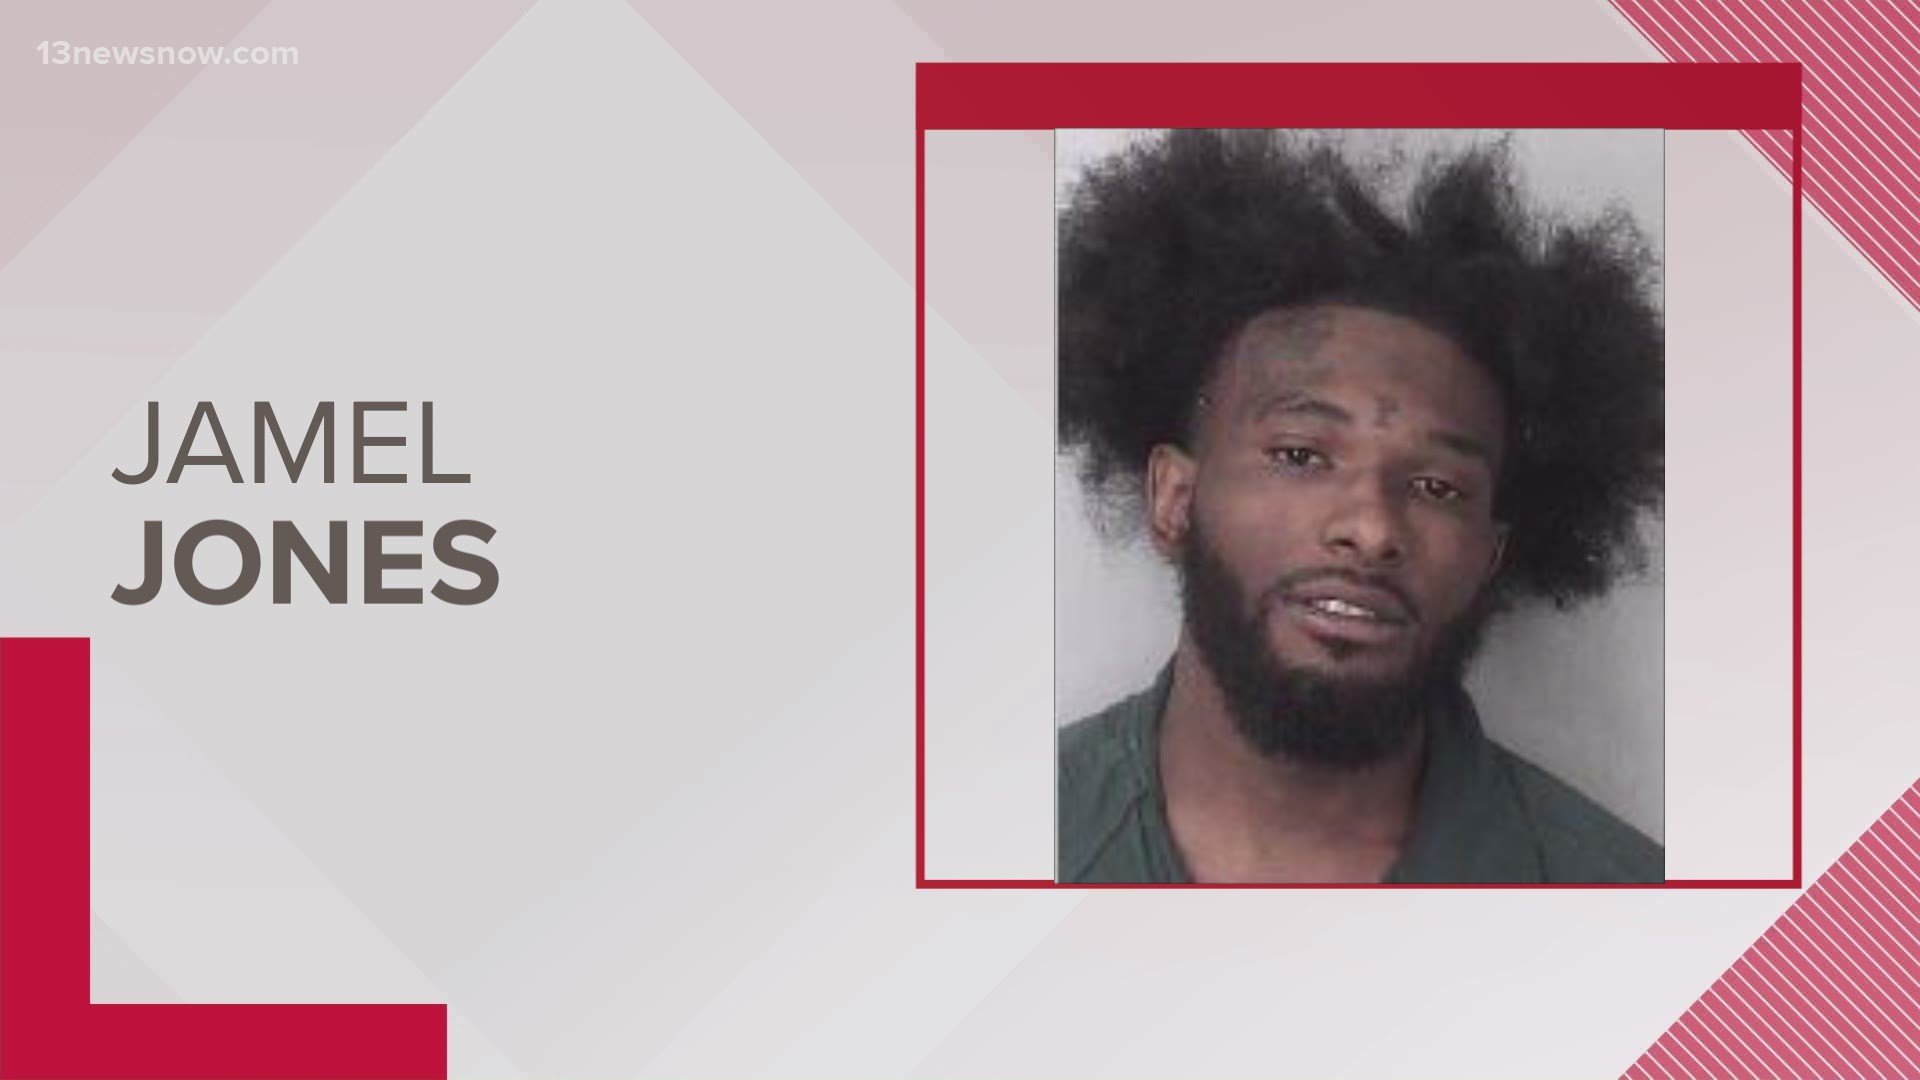 Portsmouth police said officers arrested Jamel Jones, 24. He's accused of killing a teenager on Crawford Parkway on Memorial Day.